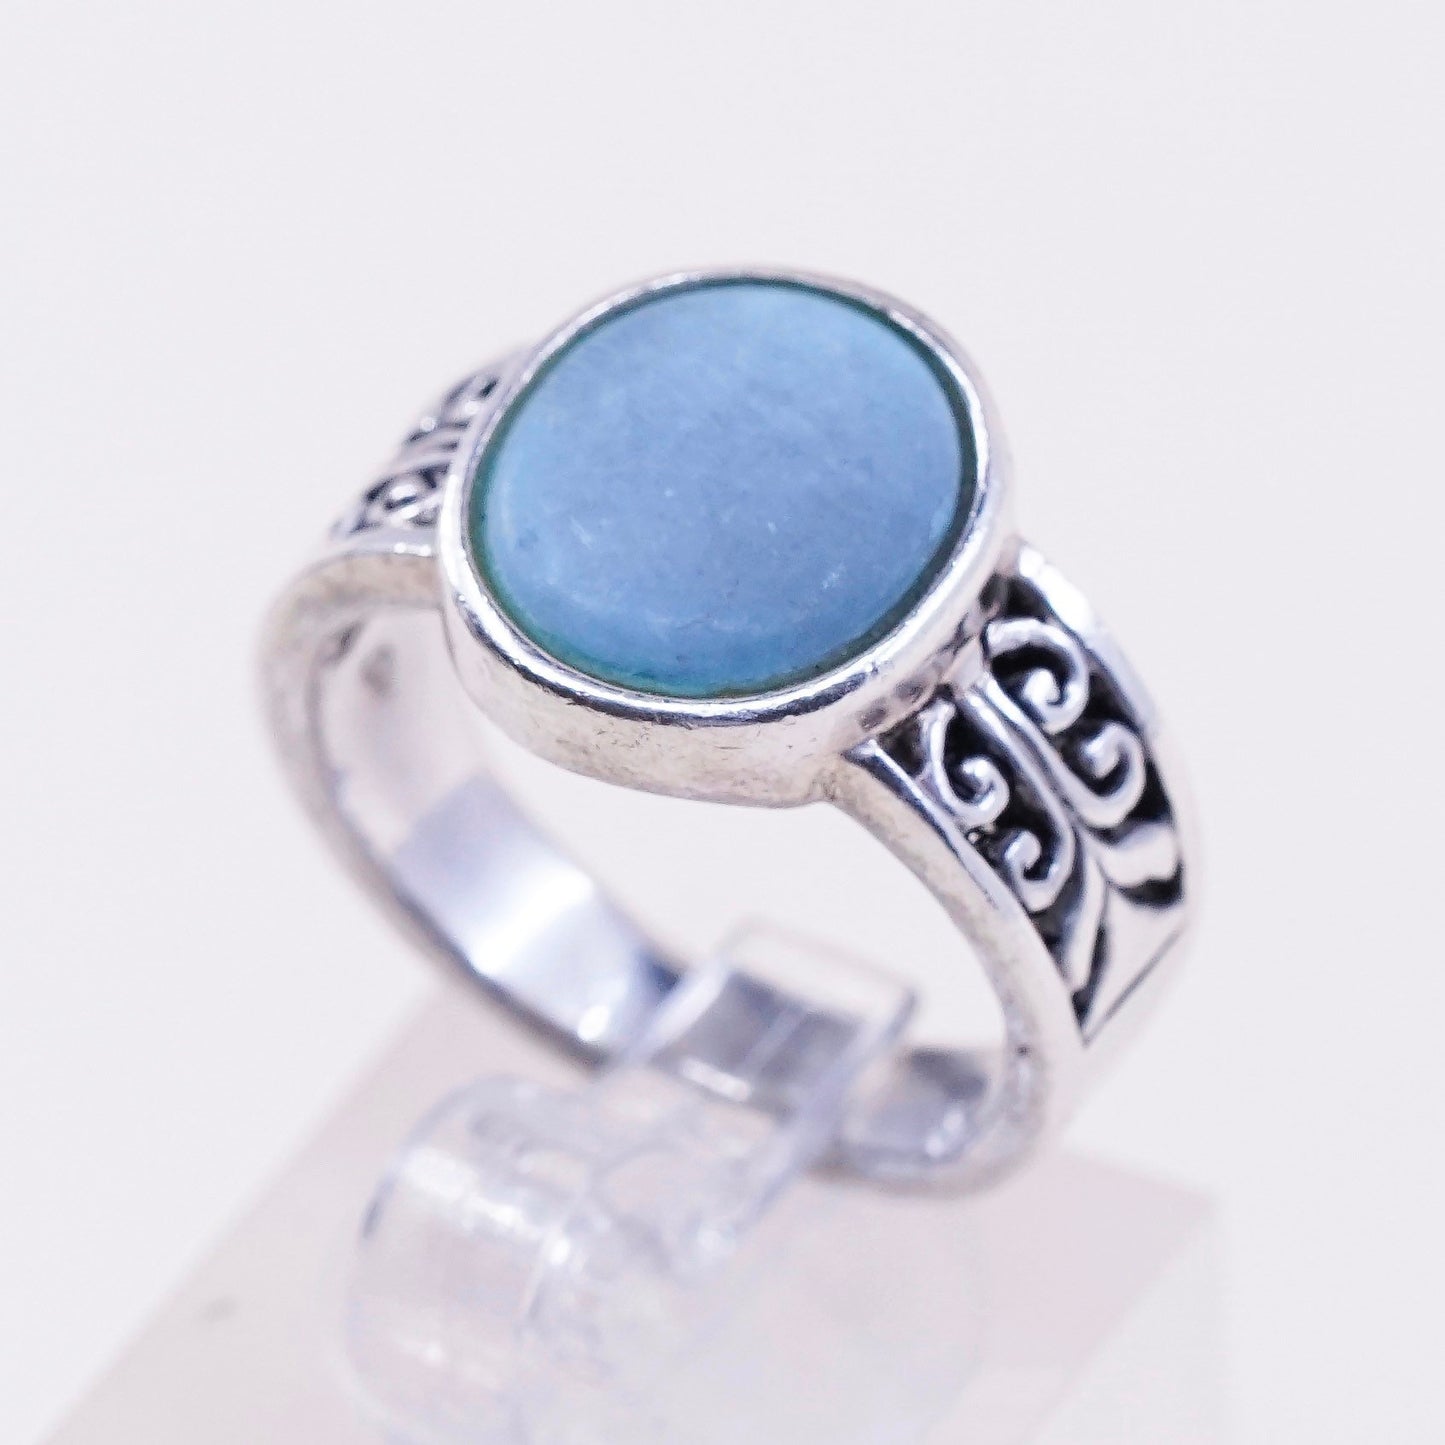 Size 8, Vintage sterling 925 silver handmade ring with turquoise and Filigree